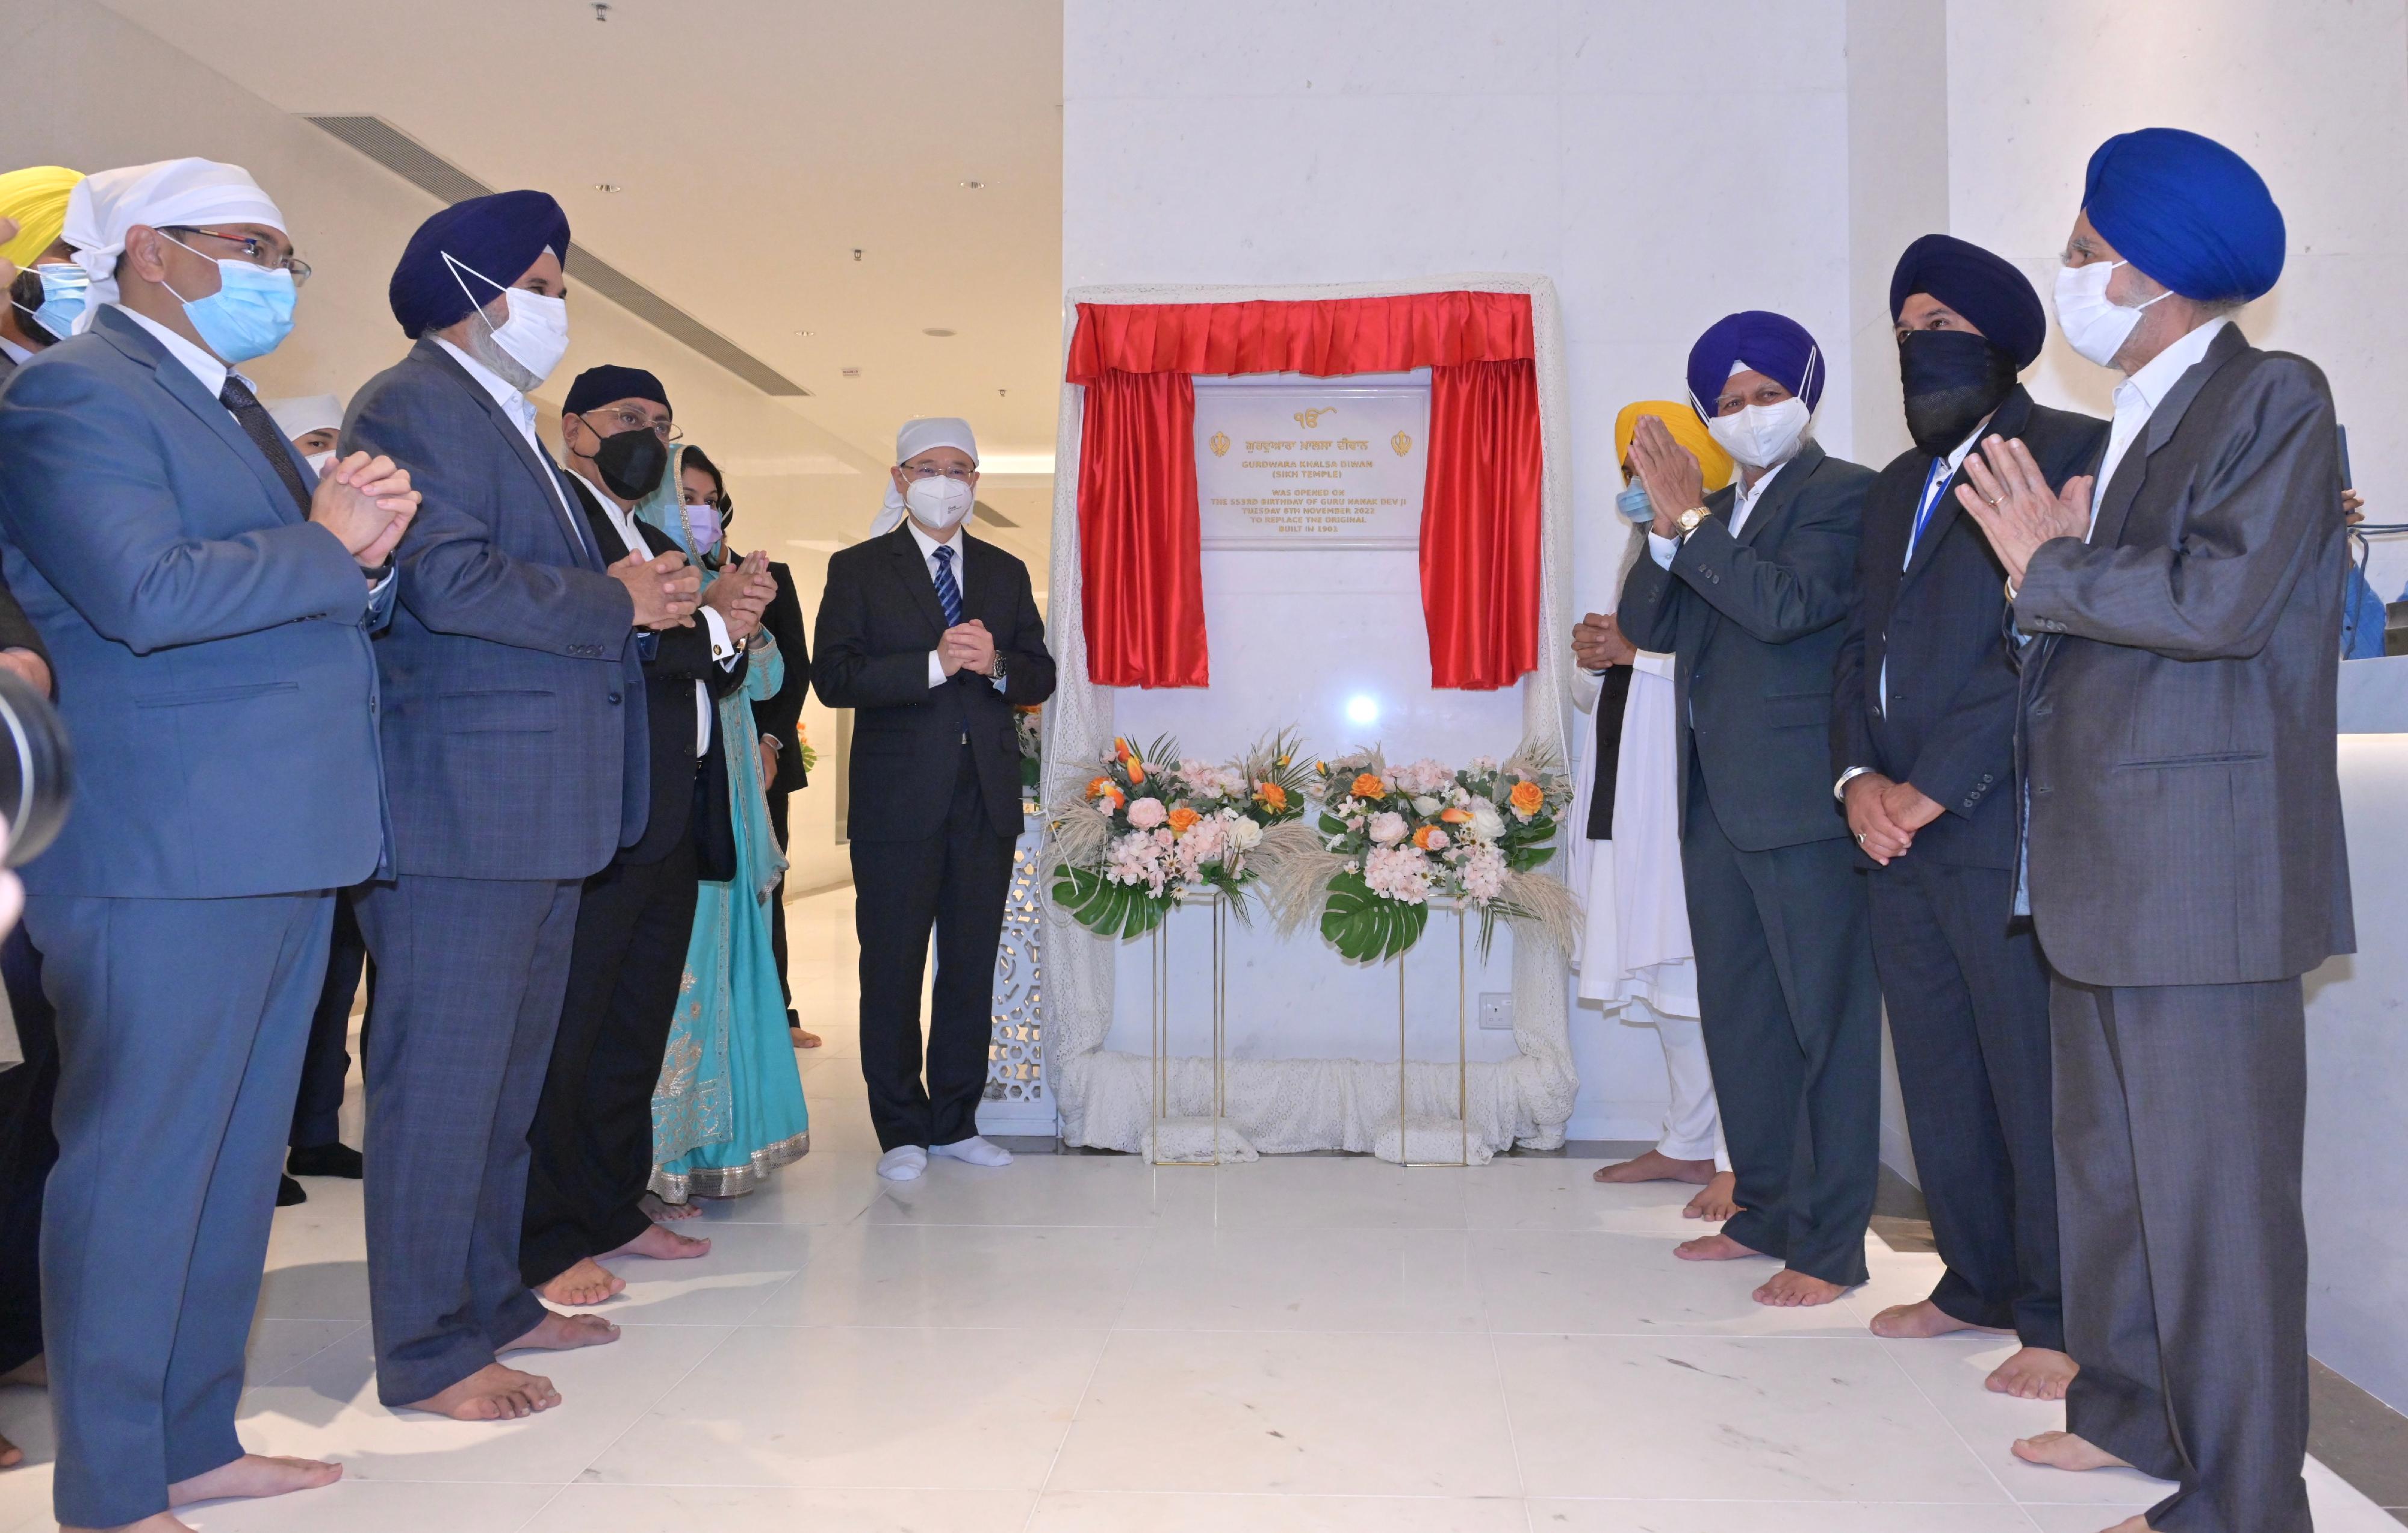 The Chief Executive, Mr John Lee, attended the opening ceremony of the new Sikh Temple today (November 8). Photo shows Mr Lee (fifth left); the Consul-General of India in Hong Kong, Ms Satwant Khanalia (fourth left); the President of the Sikh Temple, Mr Nirmal Singh (third right); and other guests officiating at the opening ceremony.
